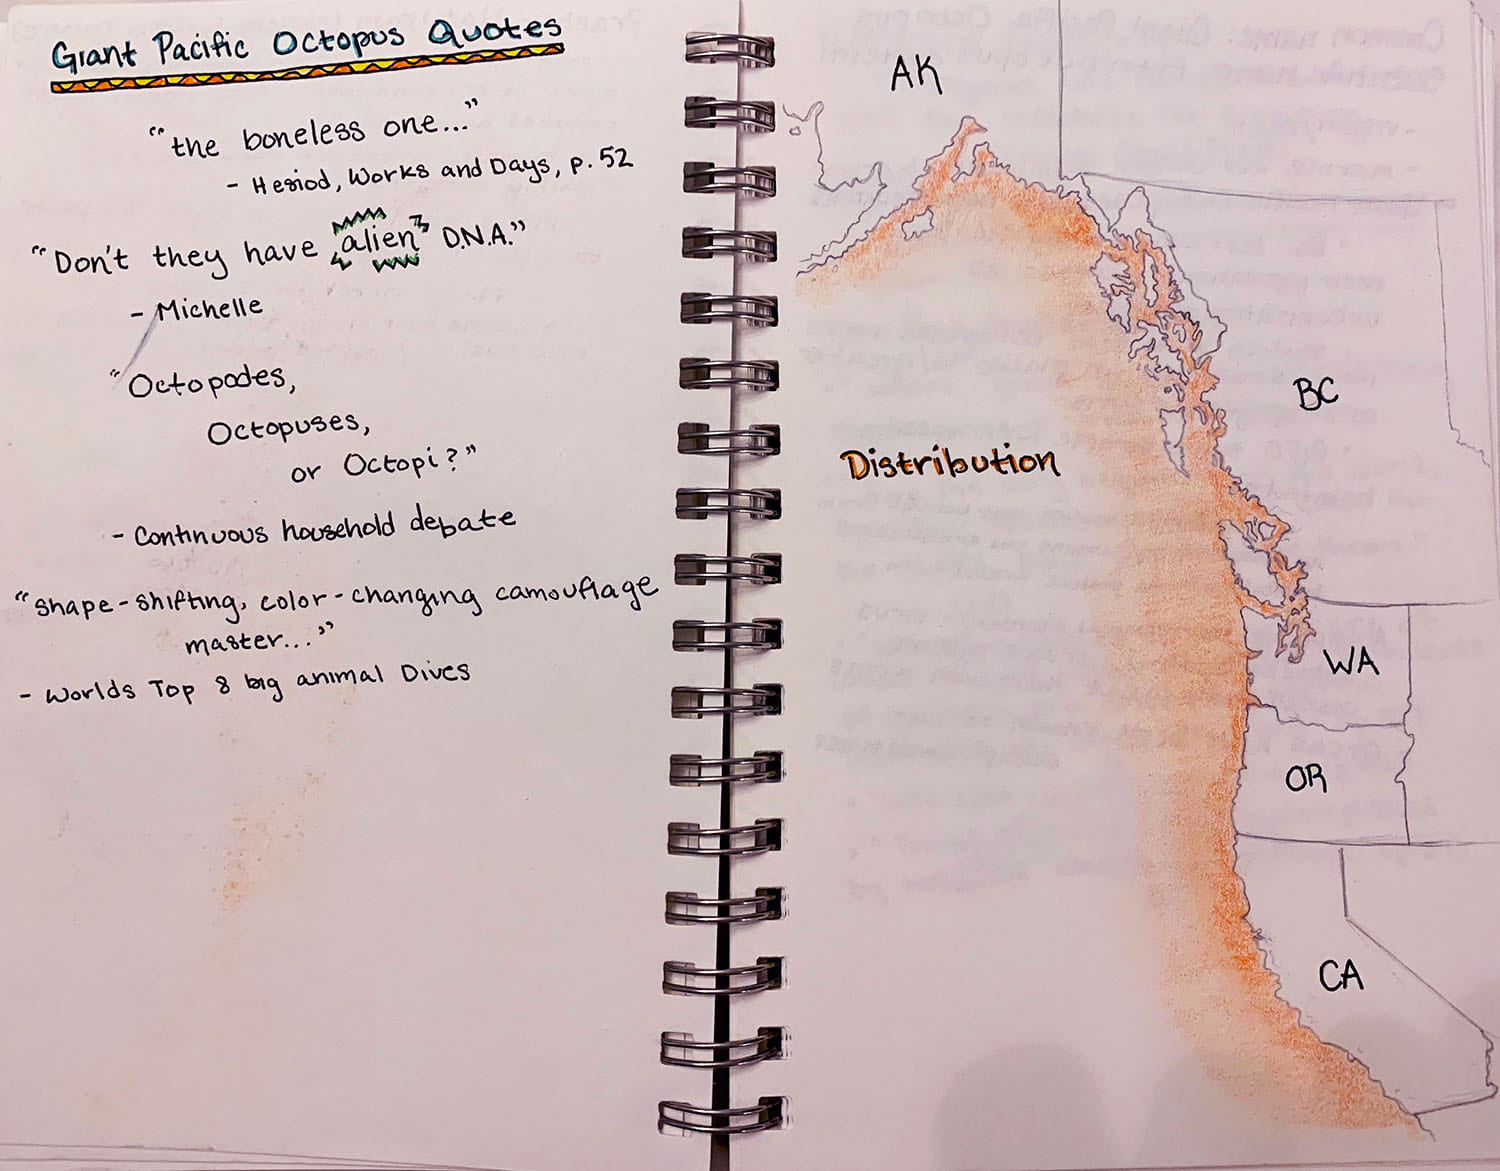 journal entry showing a hand drawn map of the west coast from Alaska to California, and a list of quotes about Giant Pacific Octopus